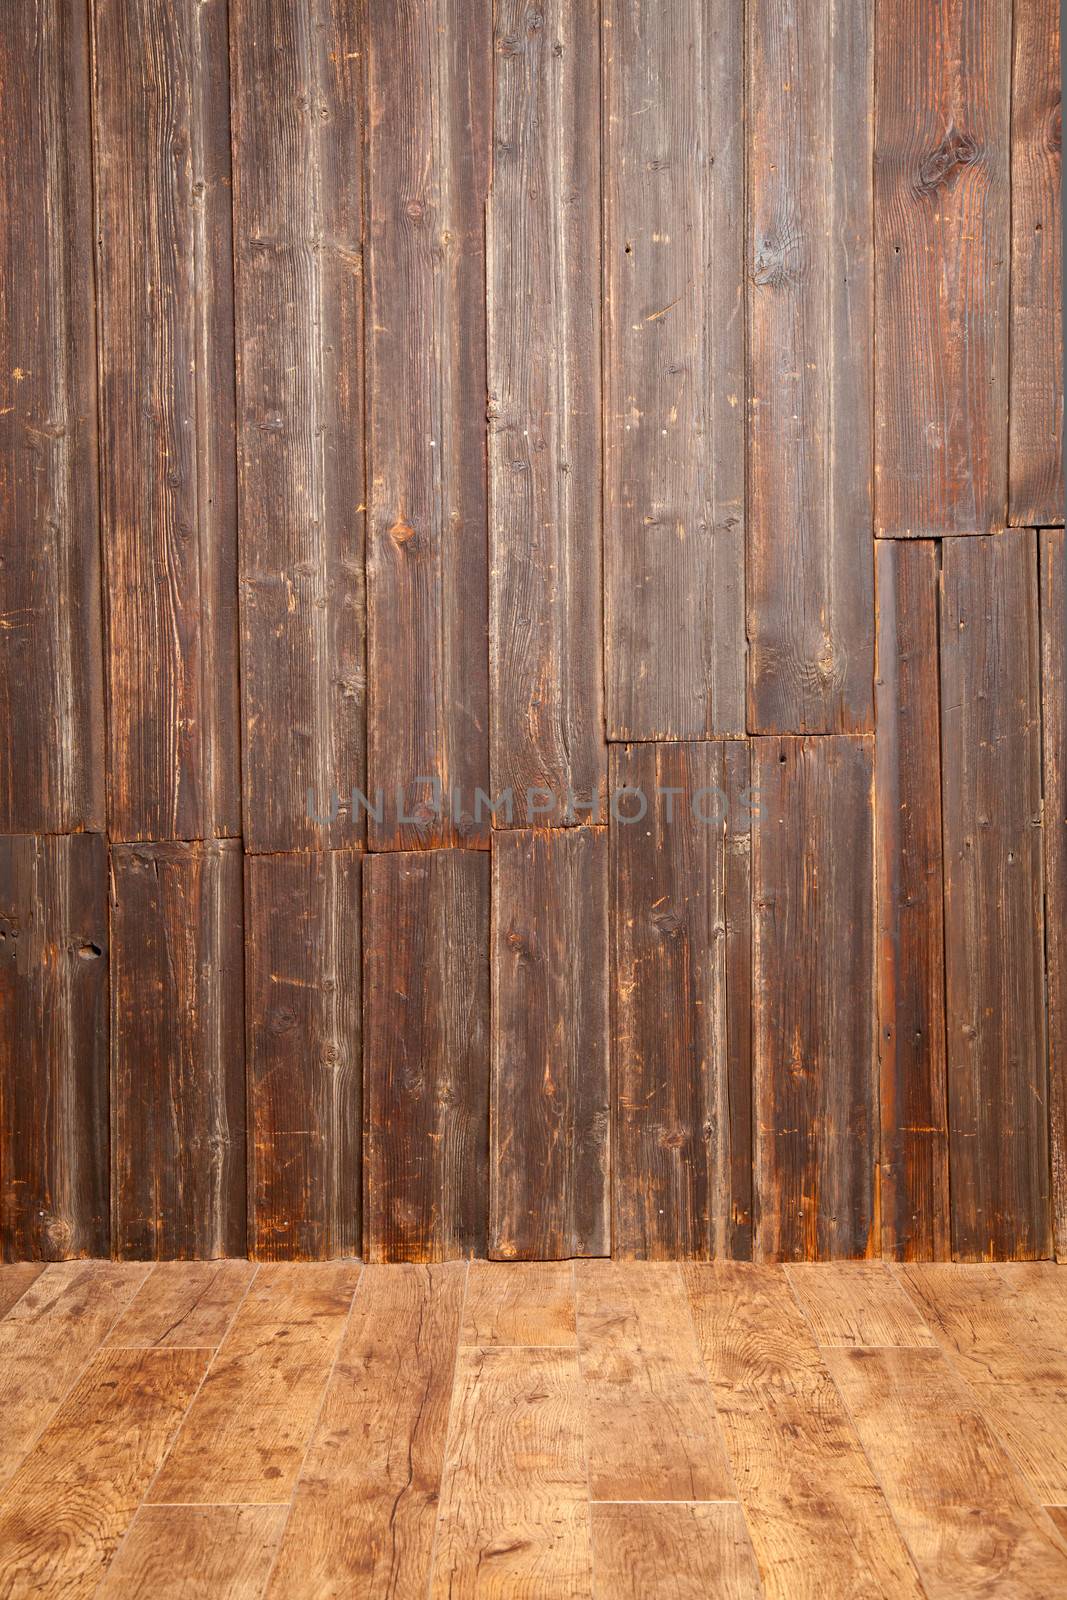 Wall decorated by old wooden planks